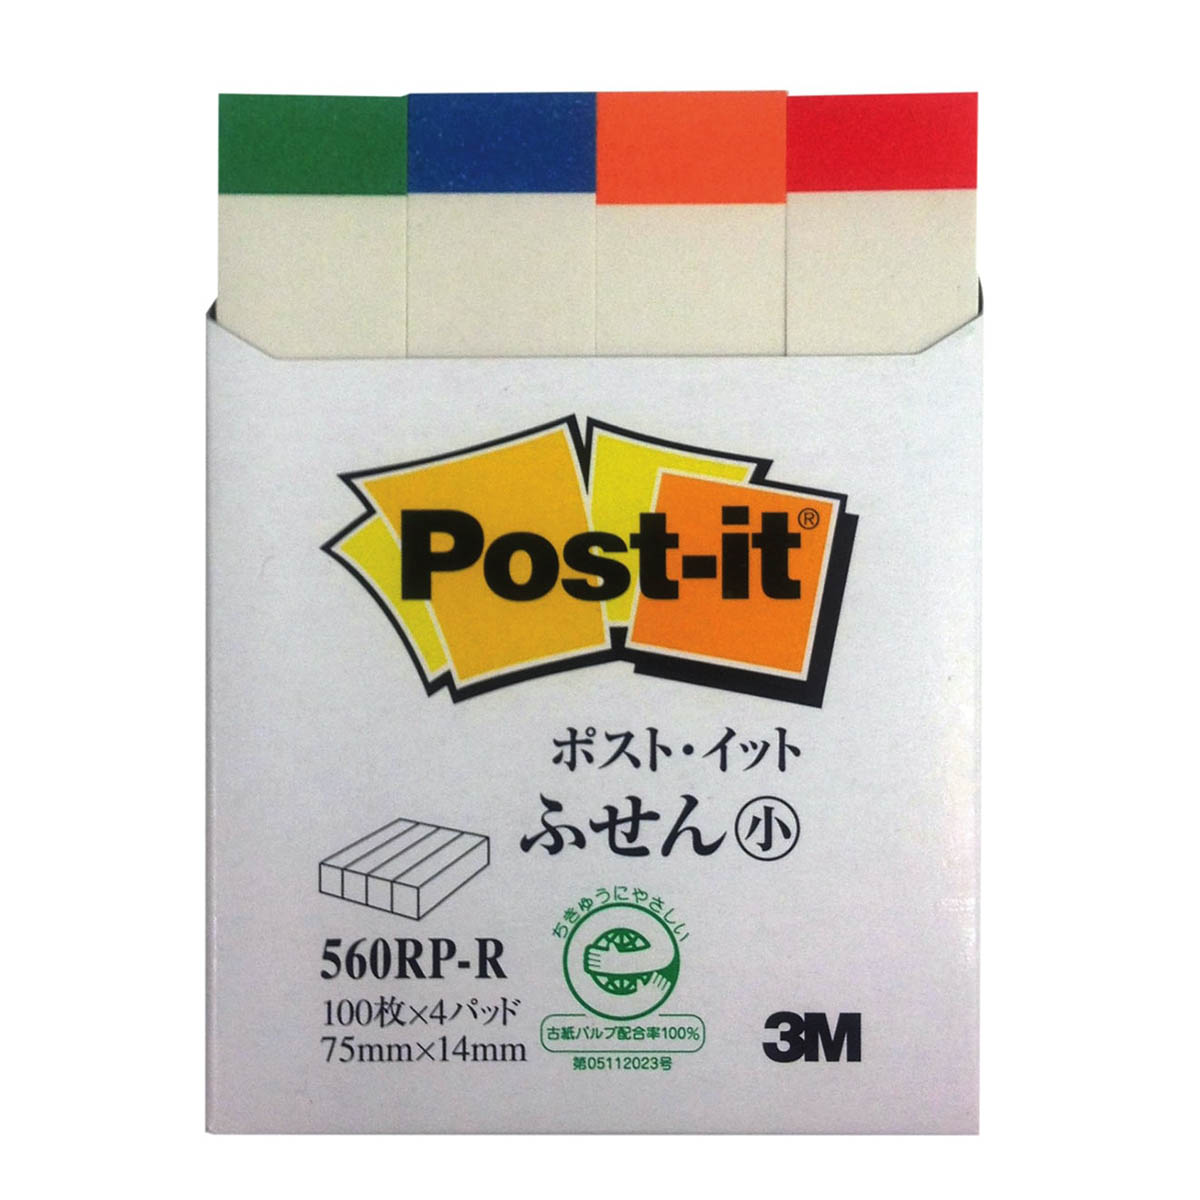 3M Post-it Pagemarkers Rainbow 75 mm X 14 mm 100 Sheets Per Colour